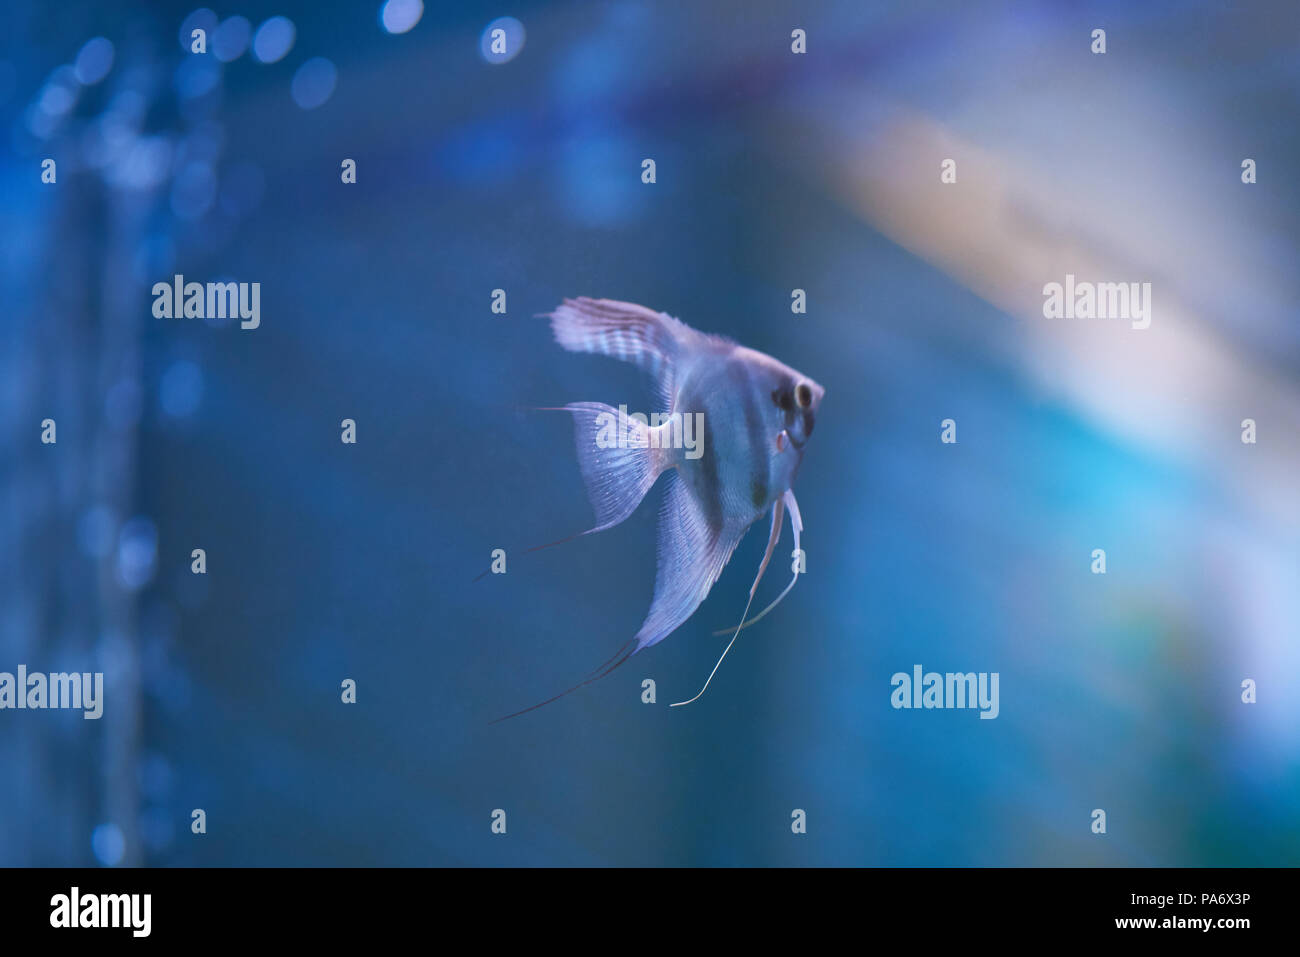 Small gray fish in blue clear aquarium water background Stock Photo